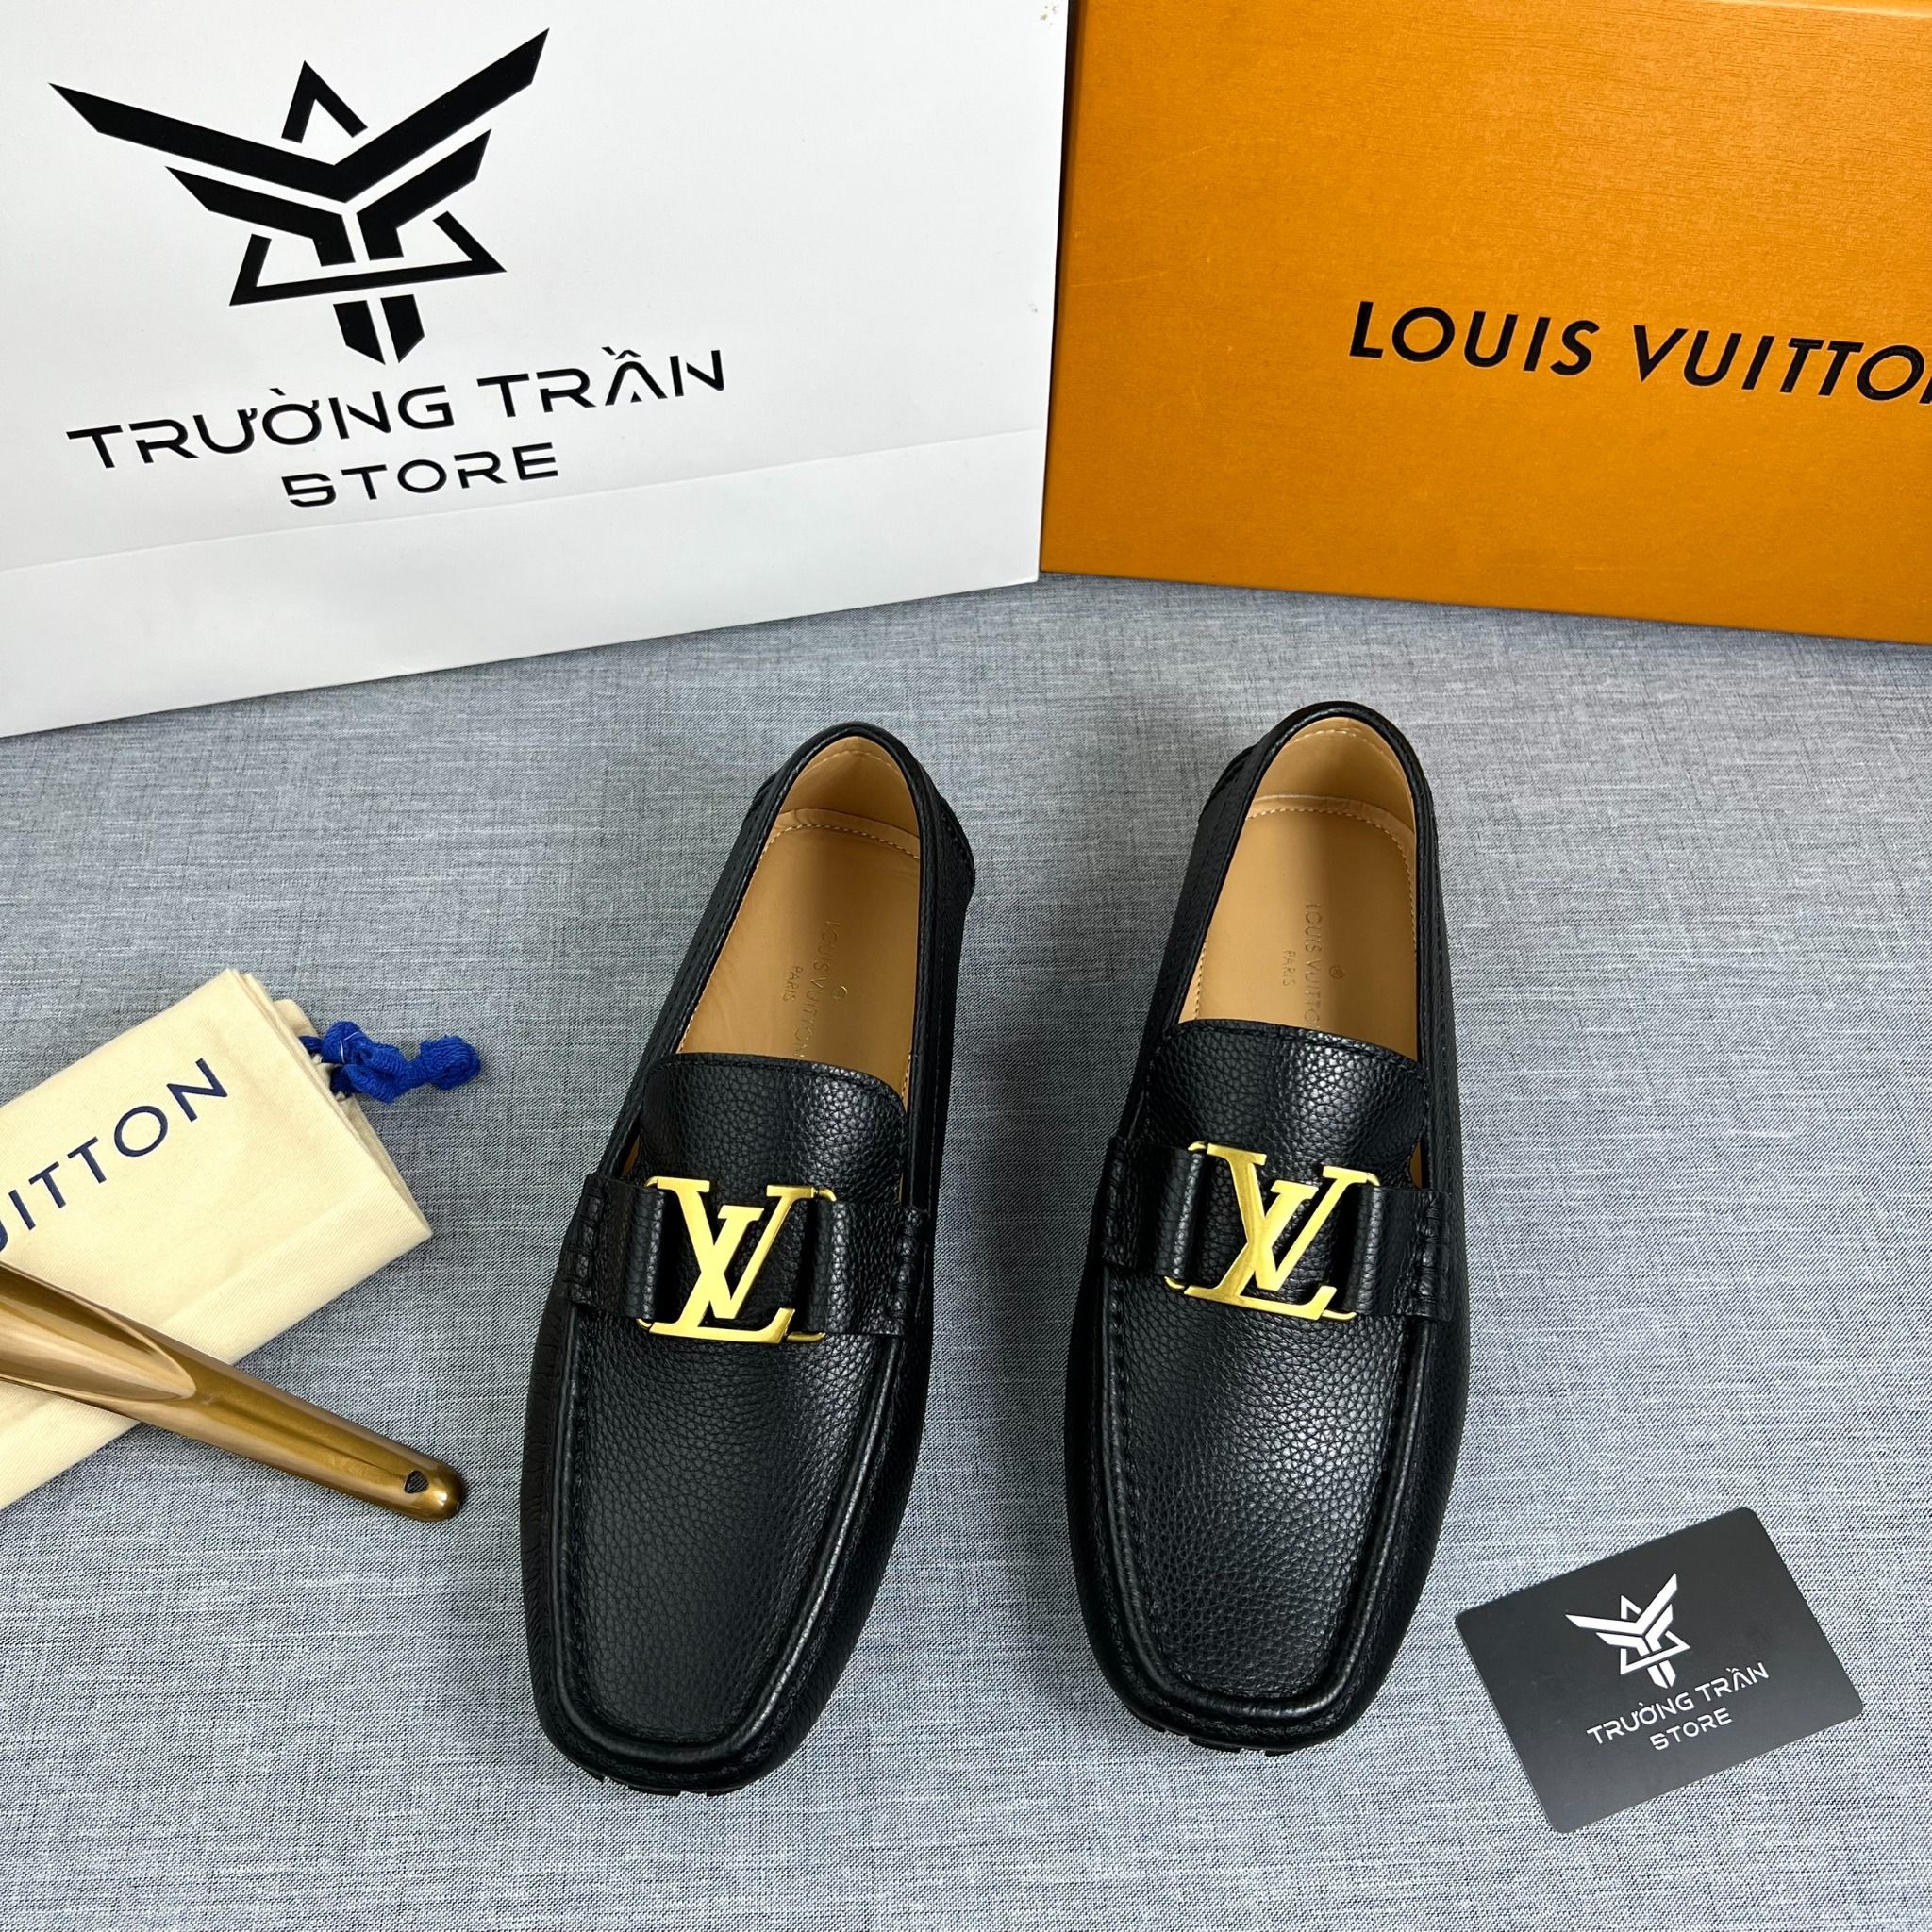 LV CLUB LOAFERS Iconic Light Weight Premium Quality Mocassin For Men  Buy  LV CLUB LOAFERS Iconic Light Weight Premium Quality Mocassin For Men Online  at Best Price  Shop Online for